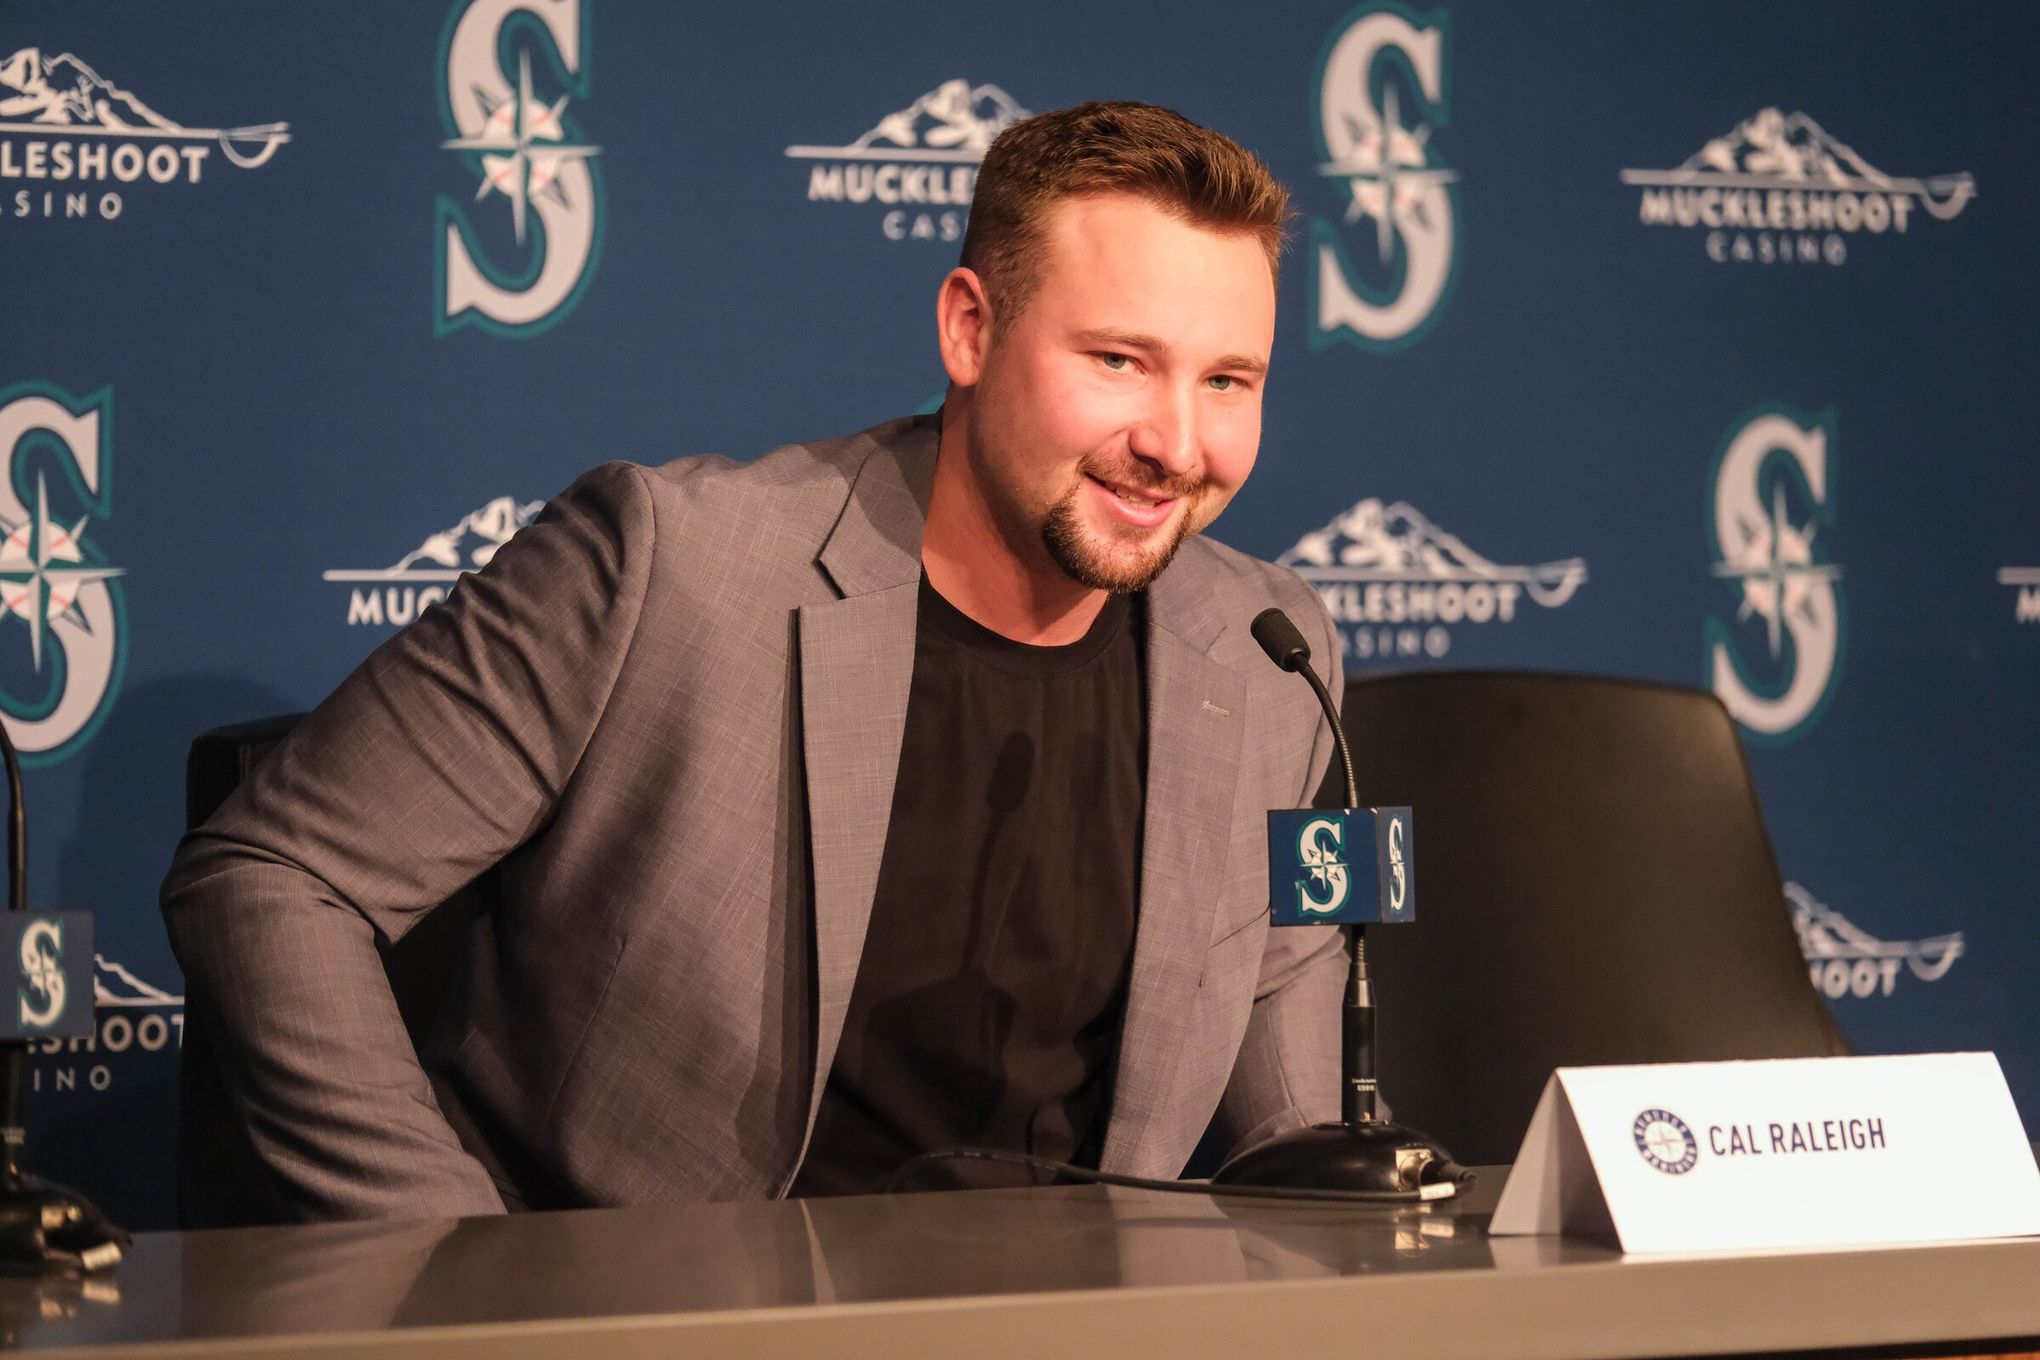 Seattle Mariners ditching road, spring training jerseys due to MLB  guidelines